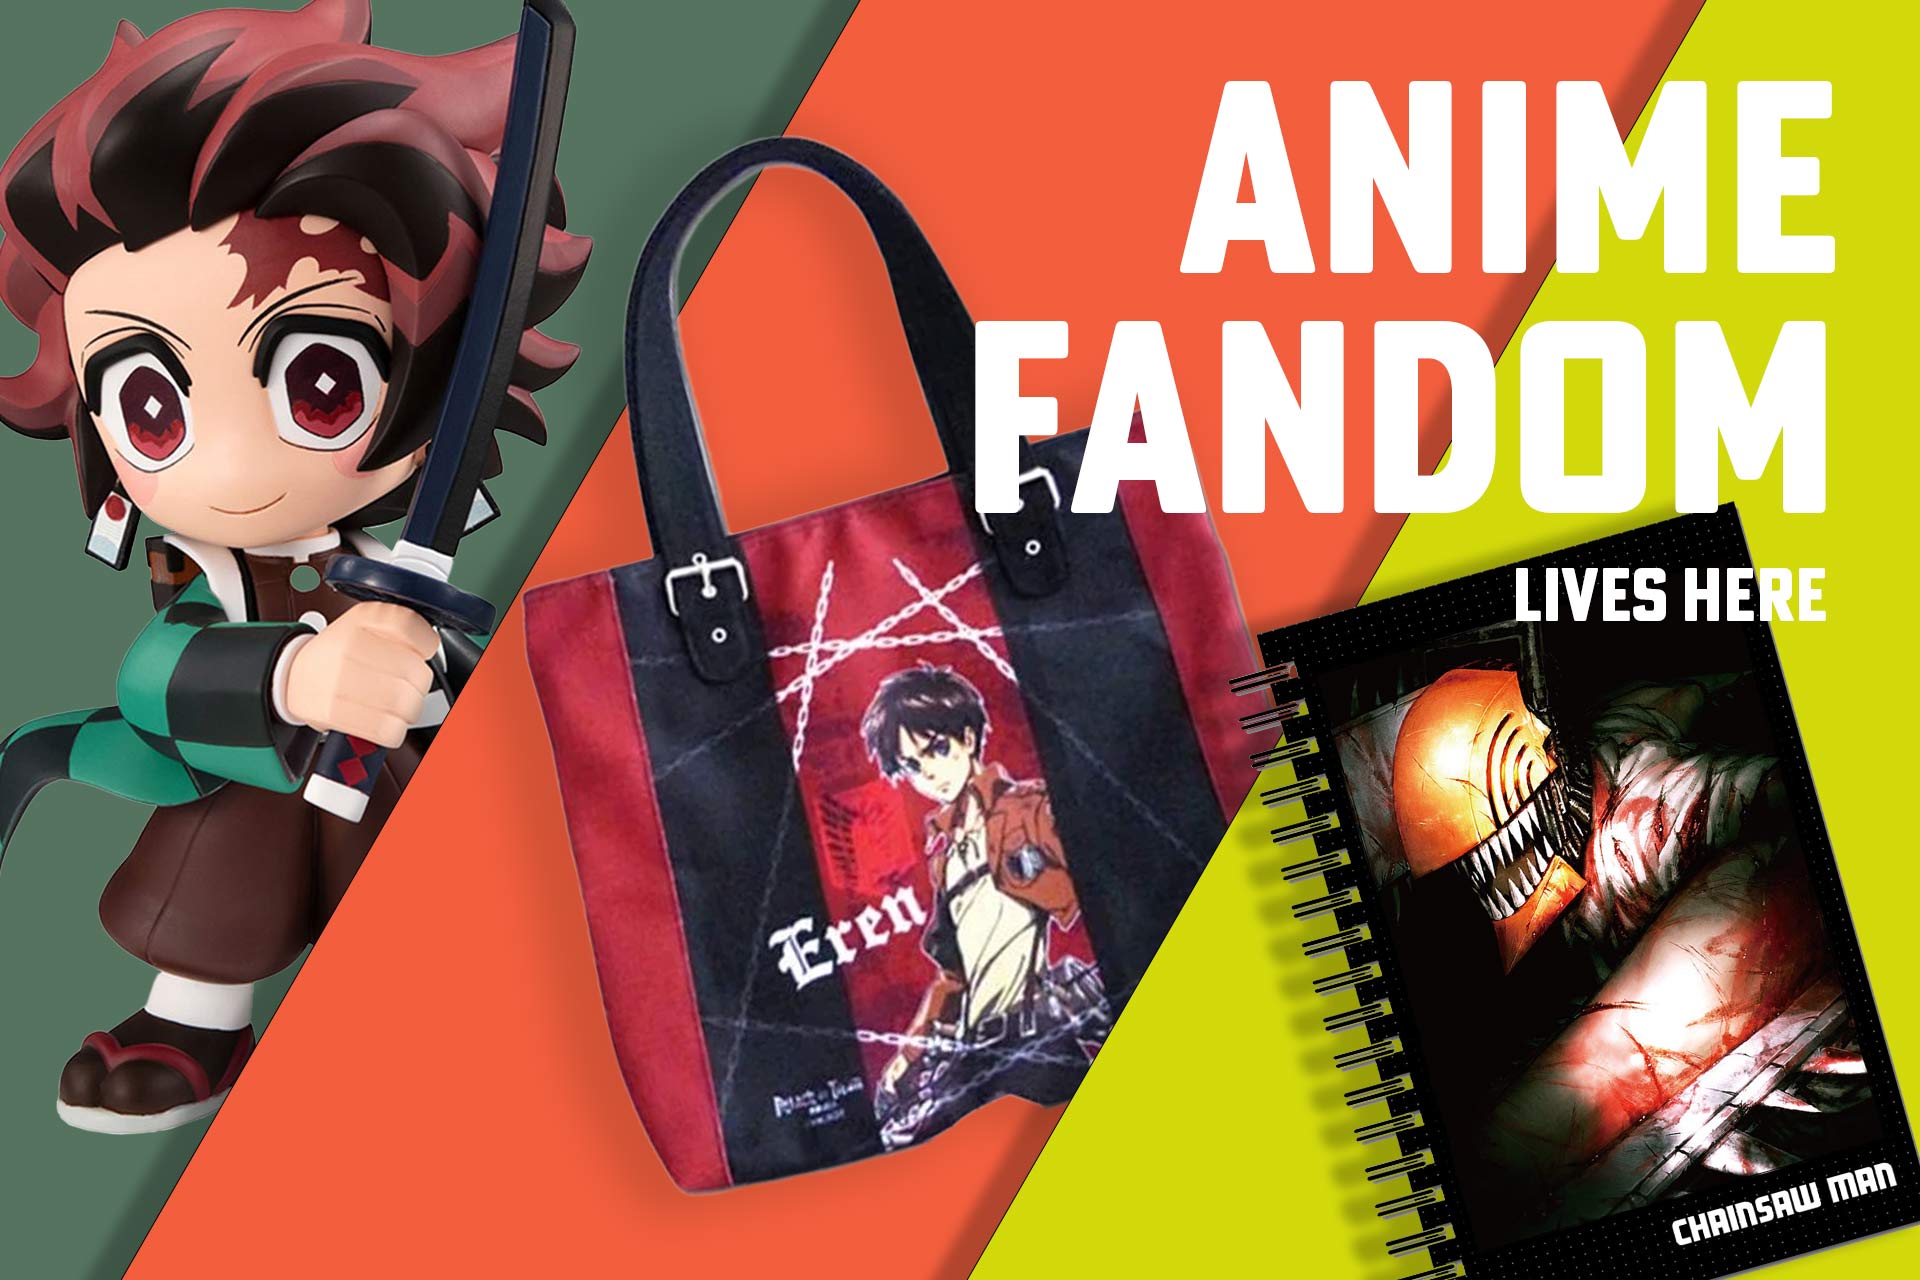 Indulge Your Anime Fandom at DriftPhase.com with our Extensive Anime Merchandise. 